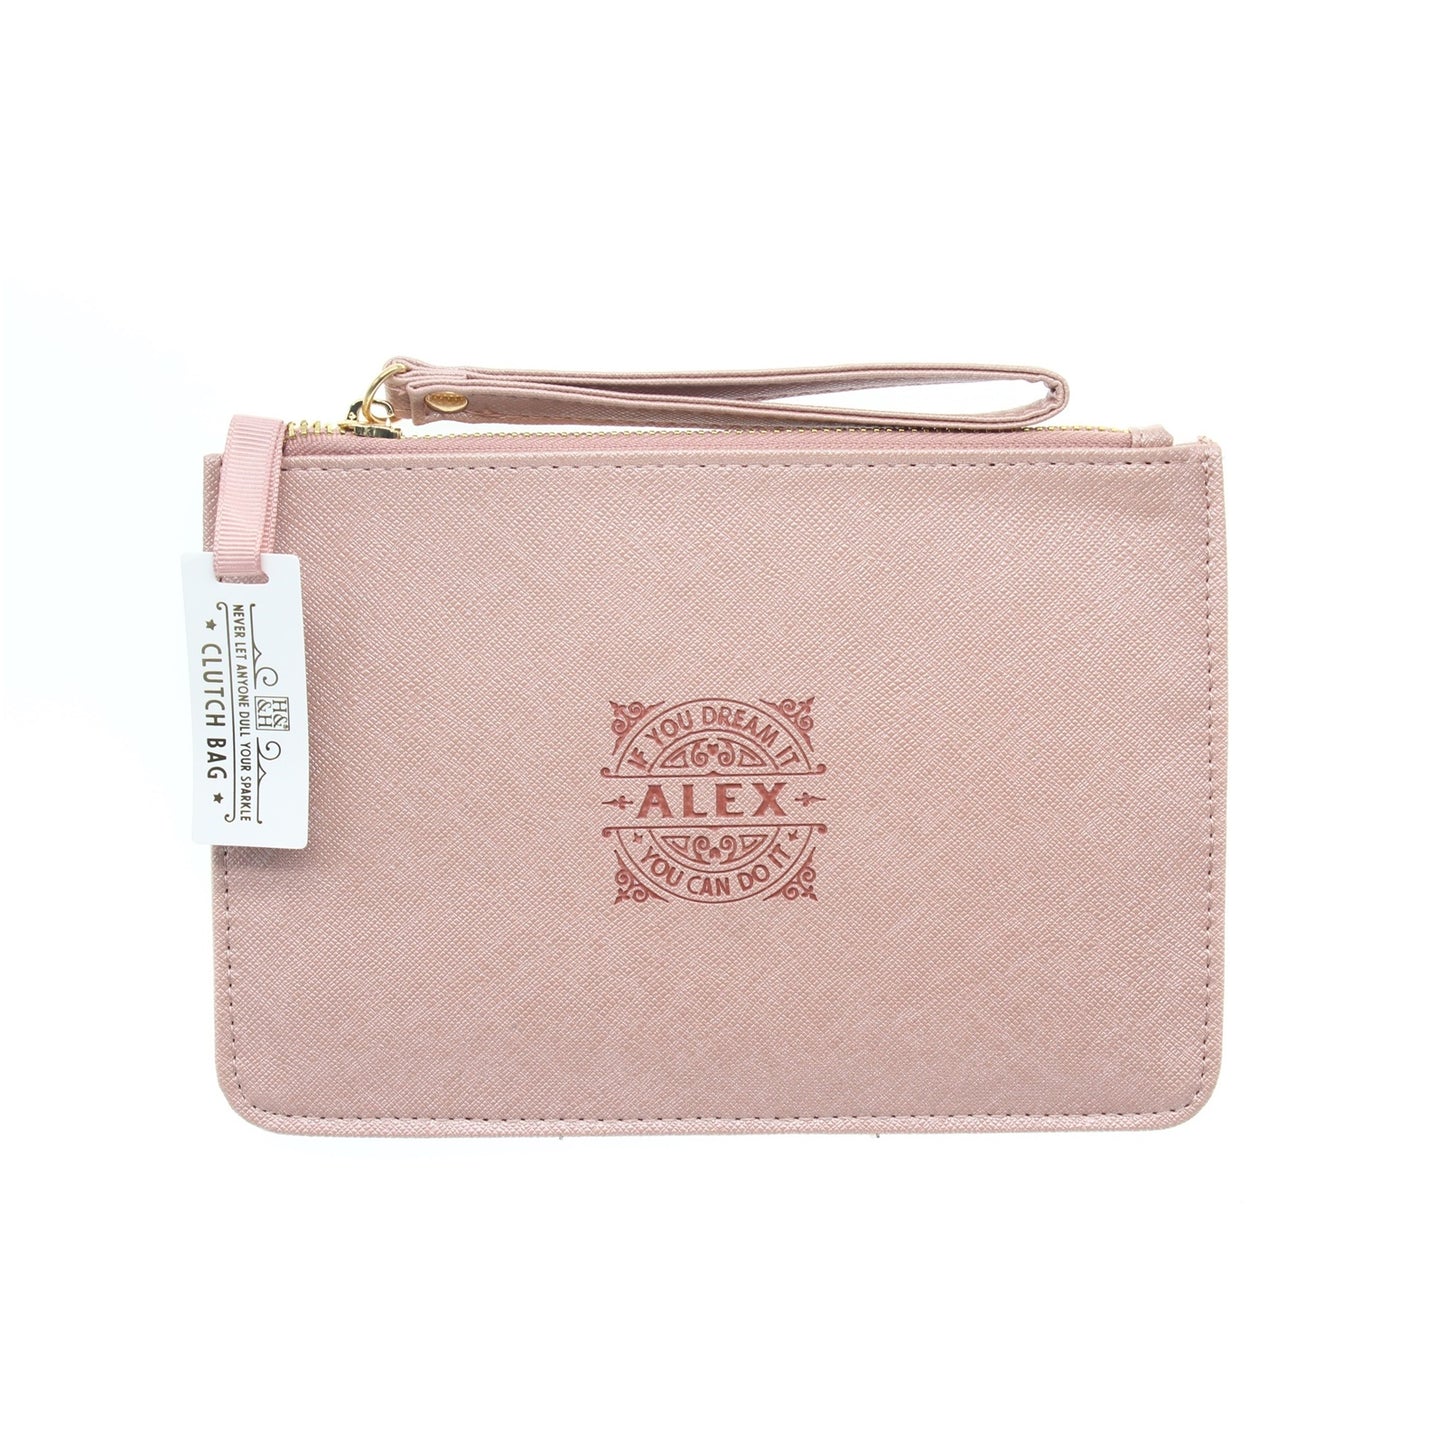 Clutch Bag With Handle & Embossed Text "Alex"